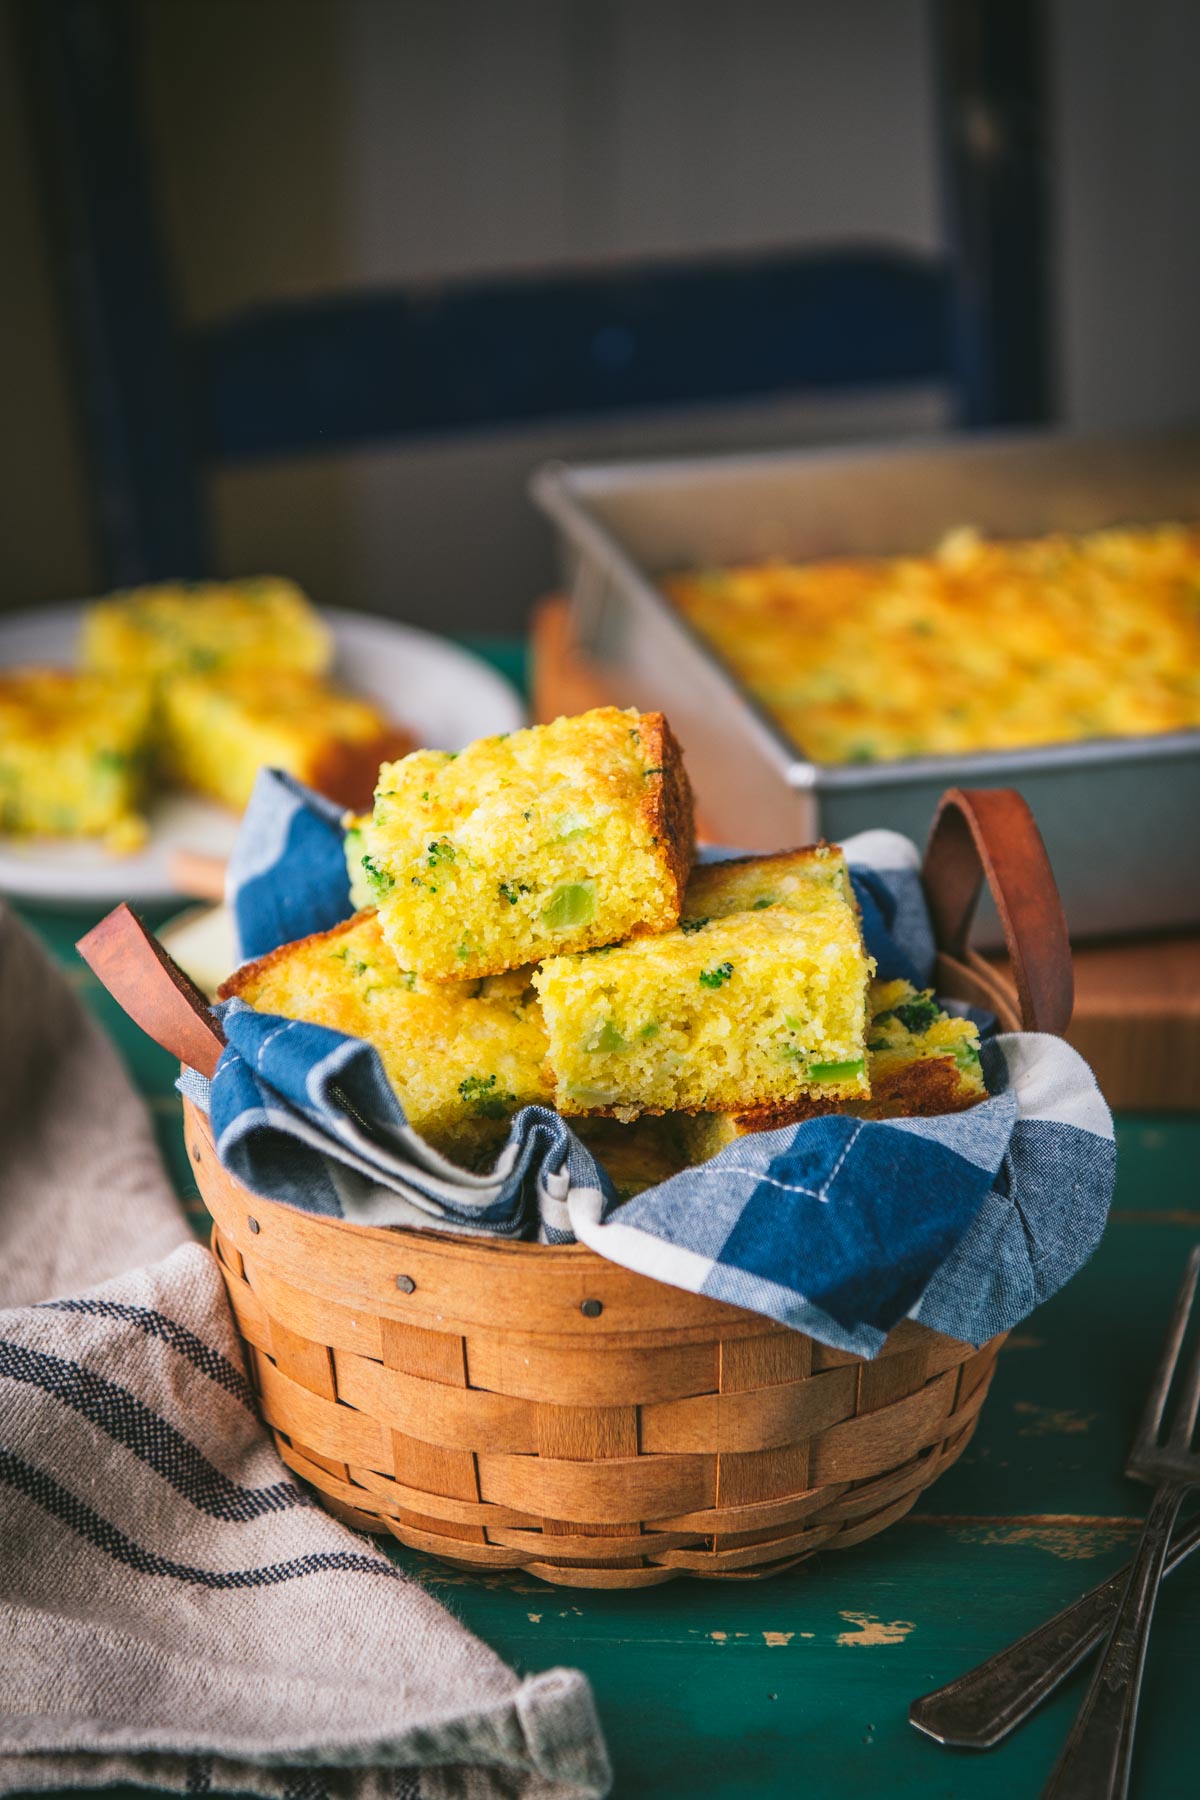 Jiffy cornbread with broccoli in a basket on a table